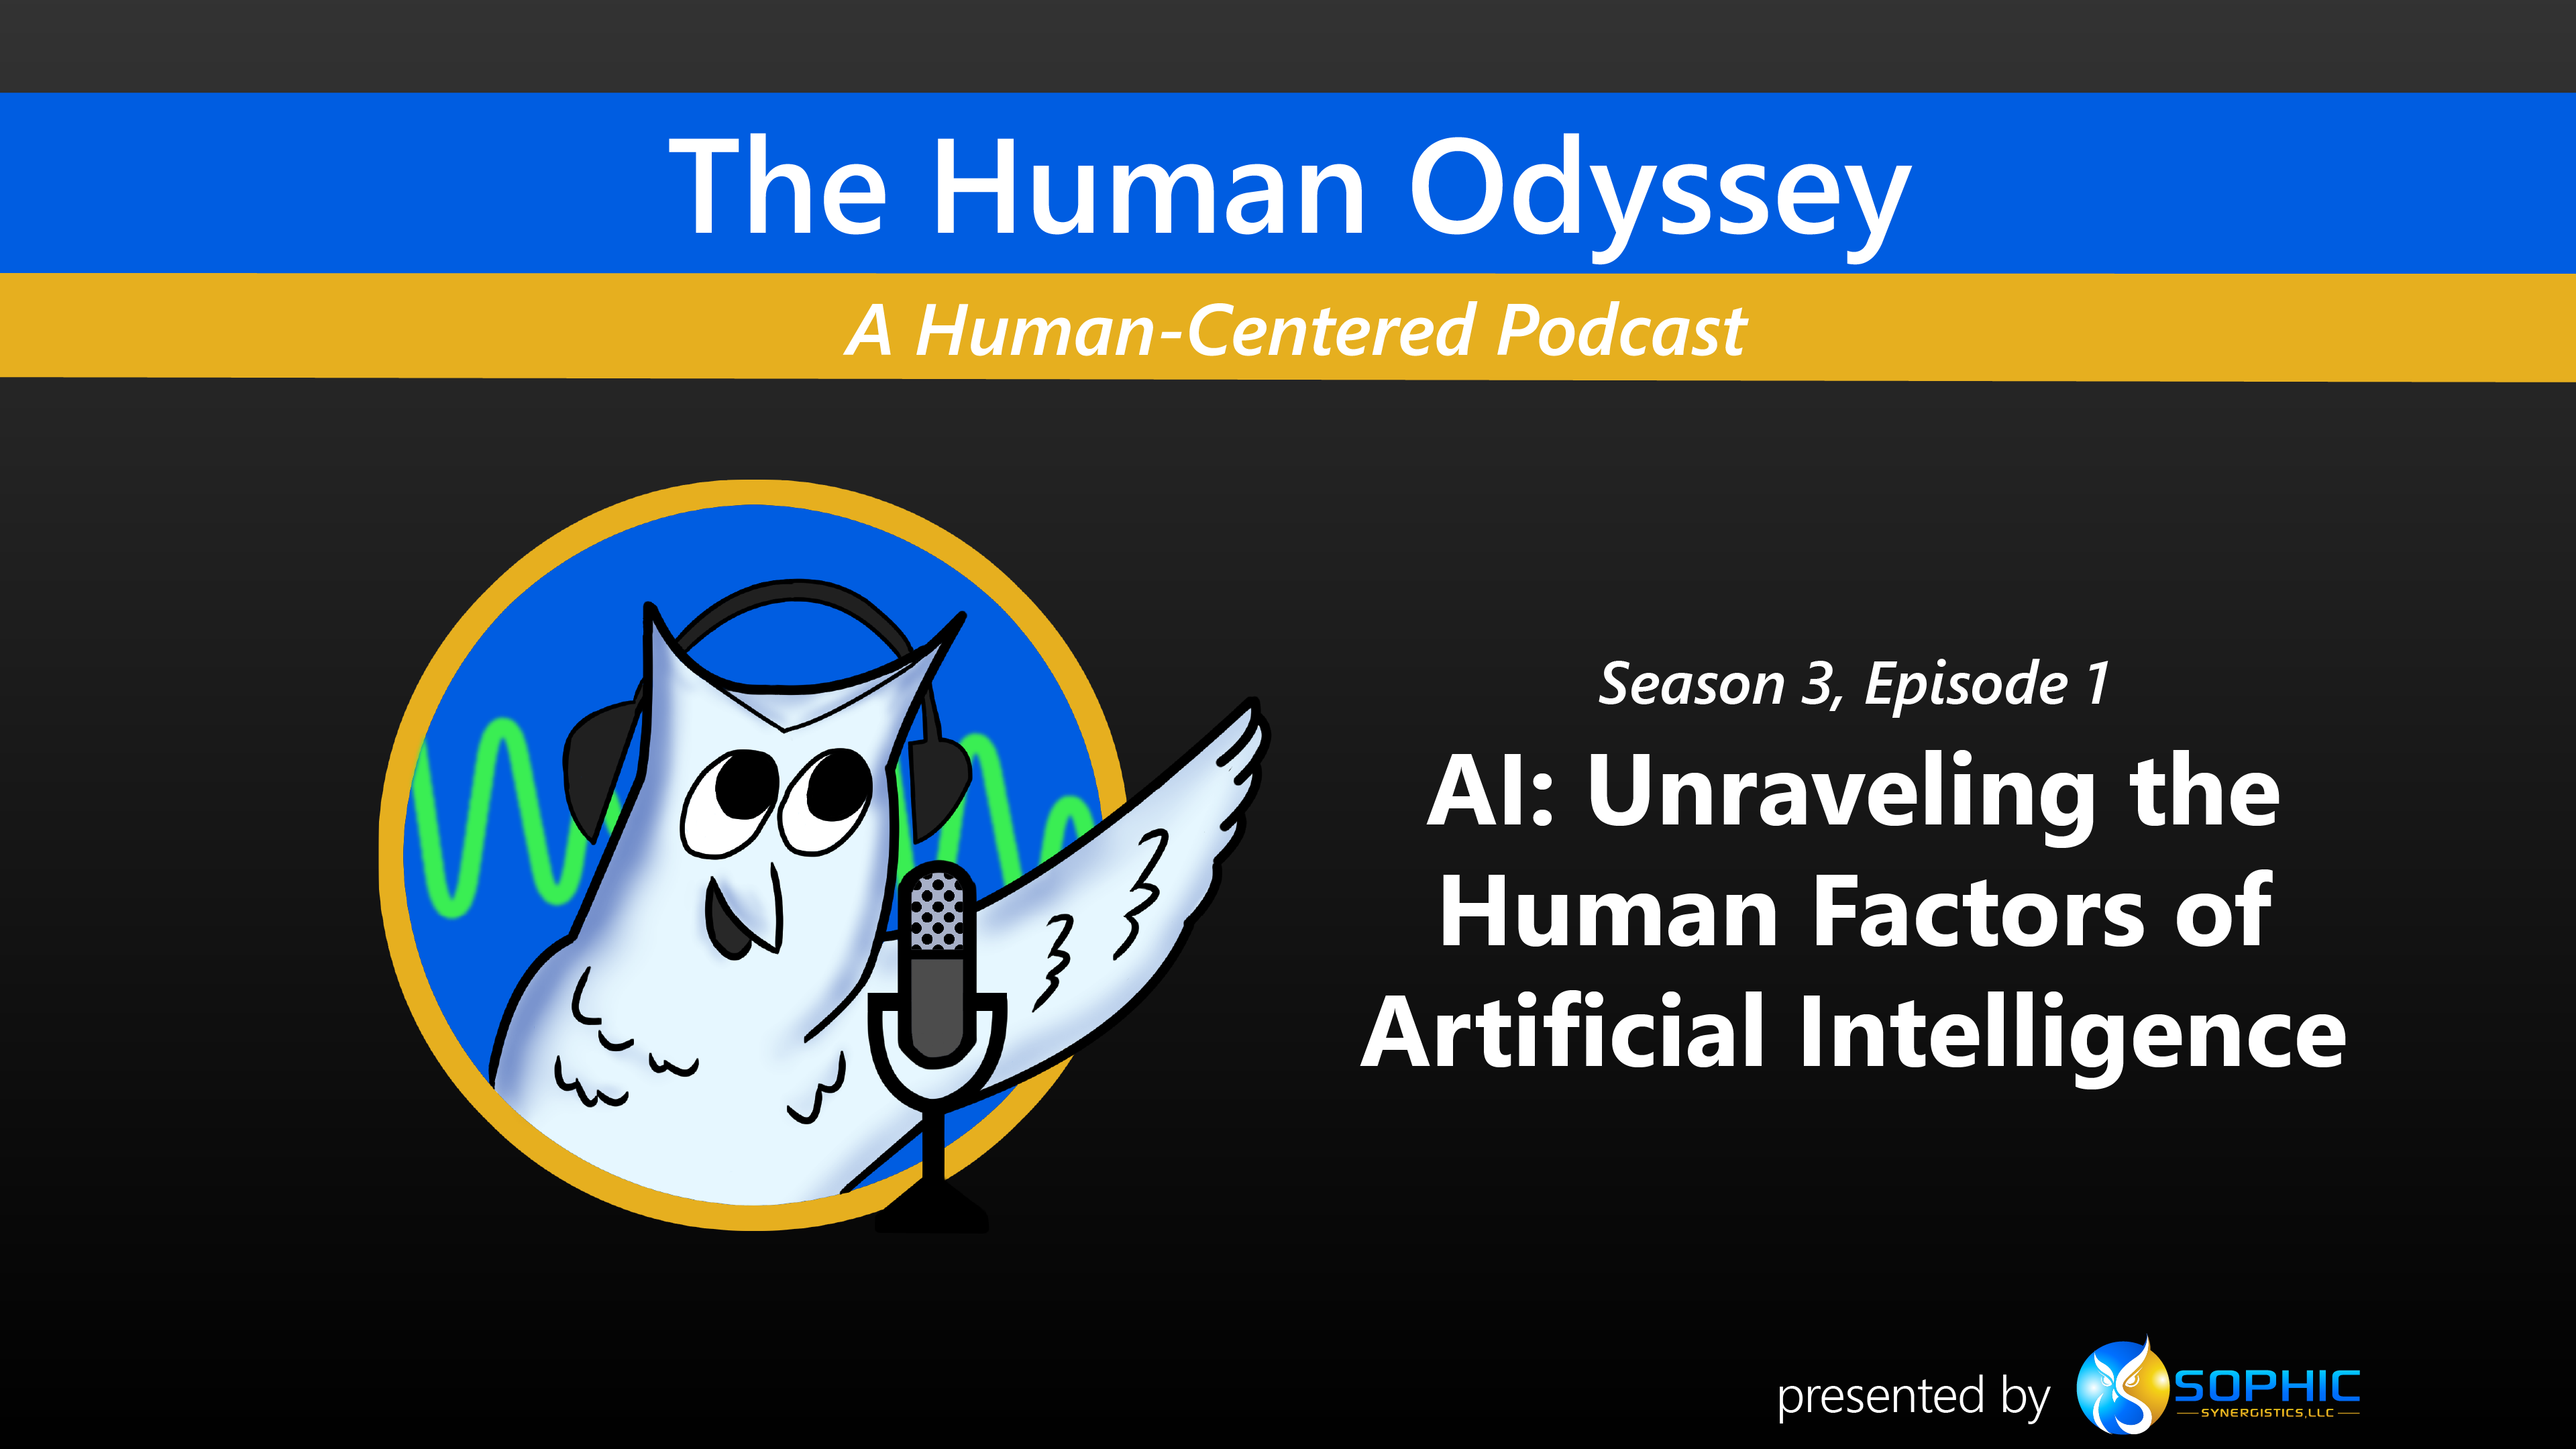 Season 3 Episode 1 - AI - Unraveling the Human Factors of Artificial Intelligence